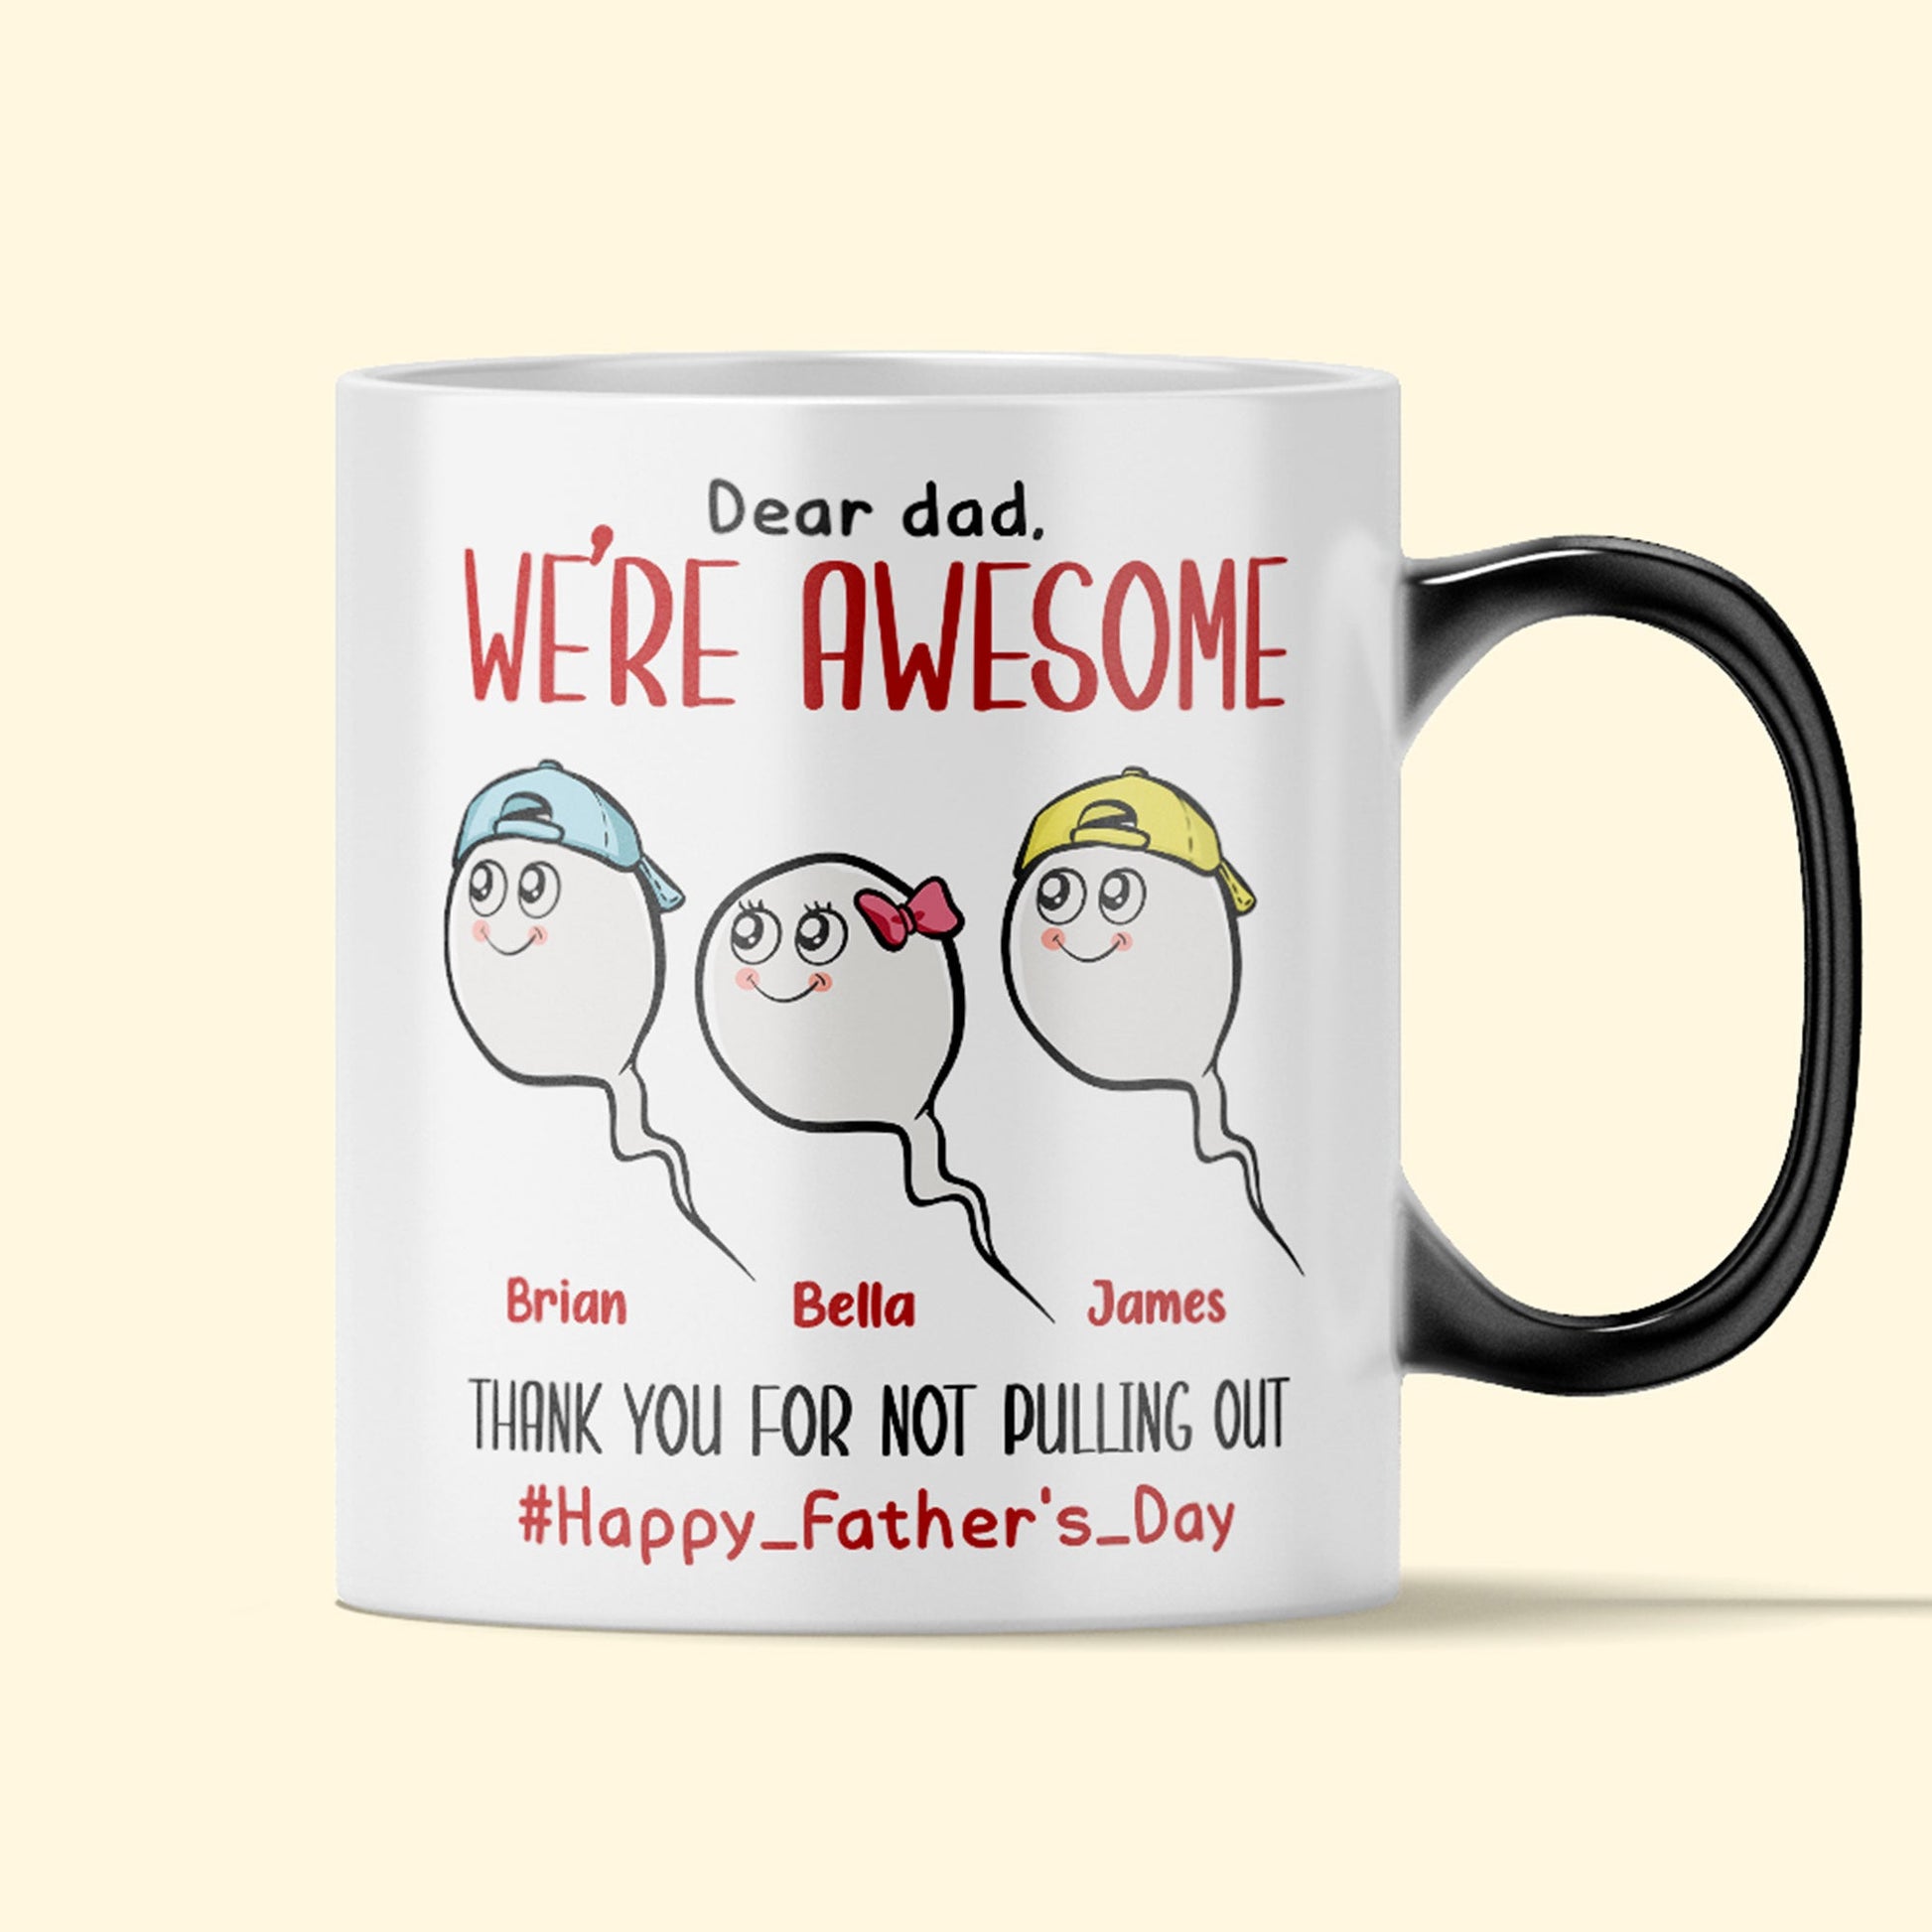 Color Changing Coffee Mug Happy Father's Day 